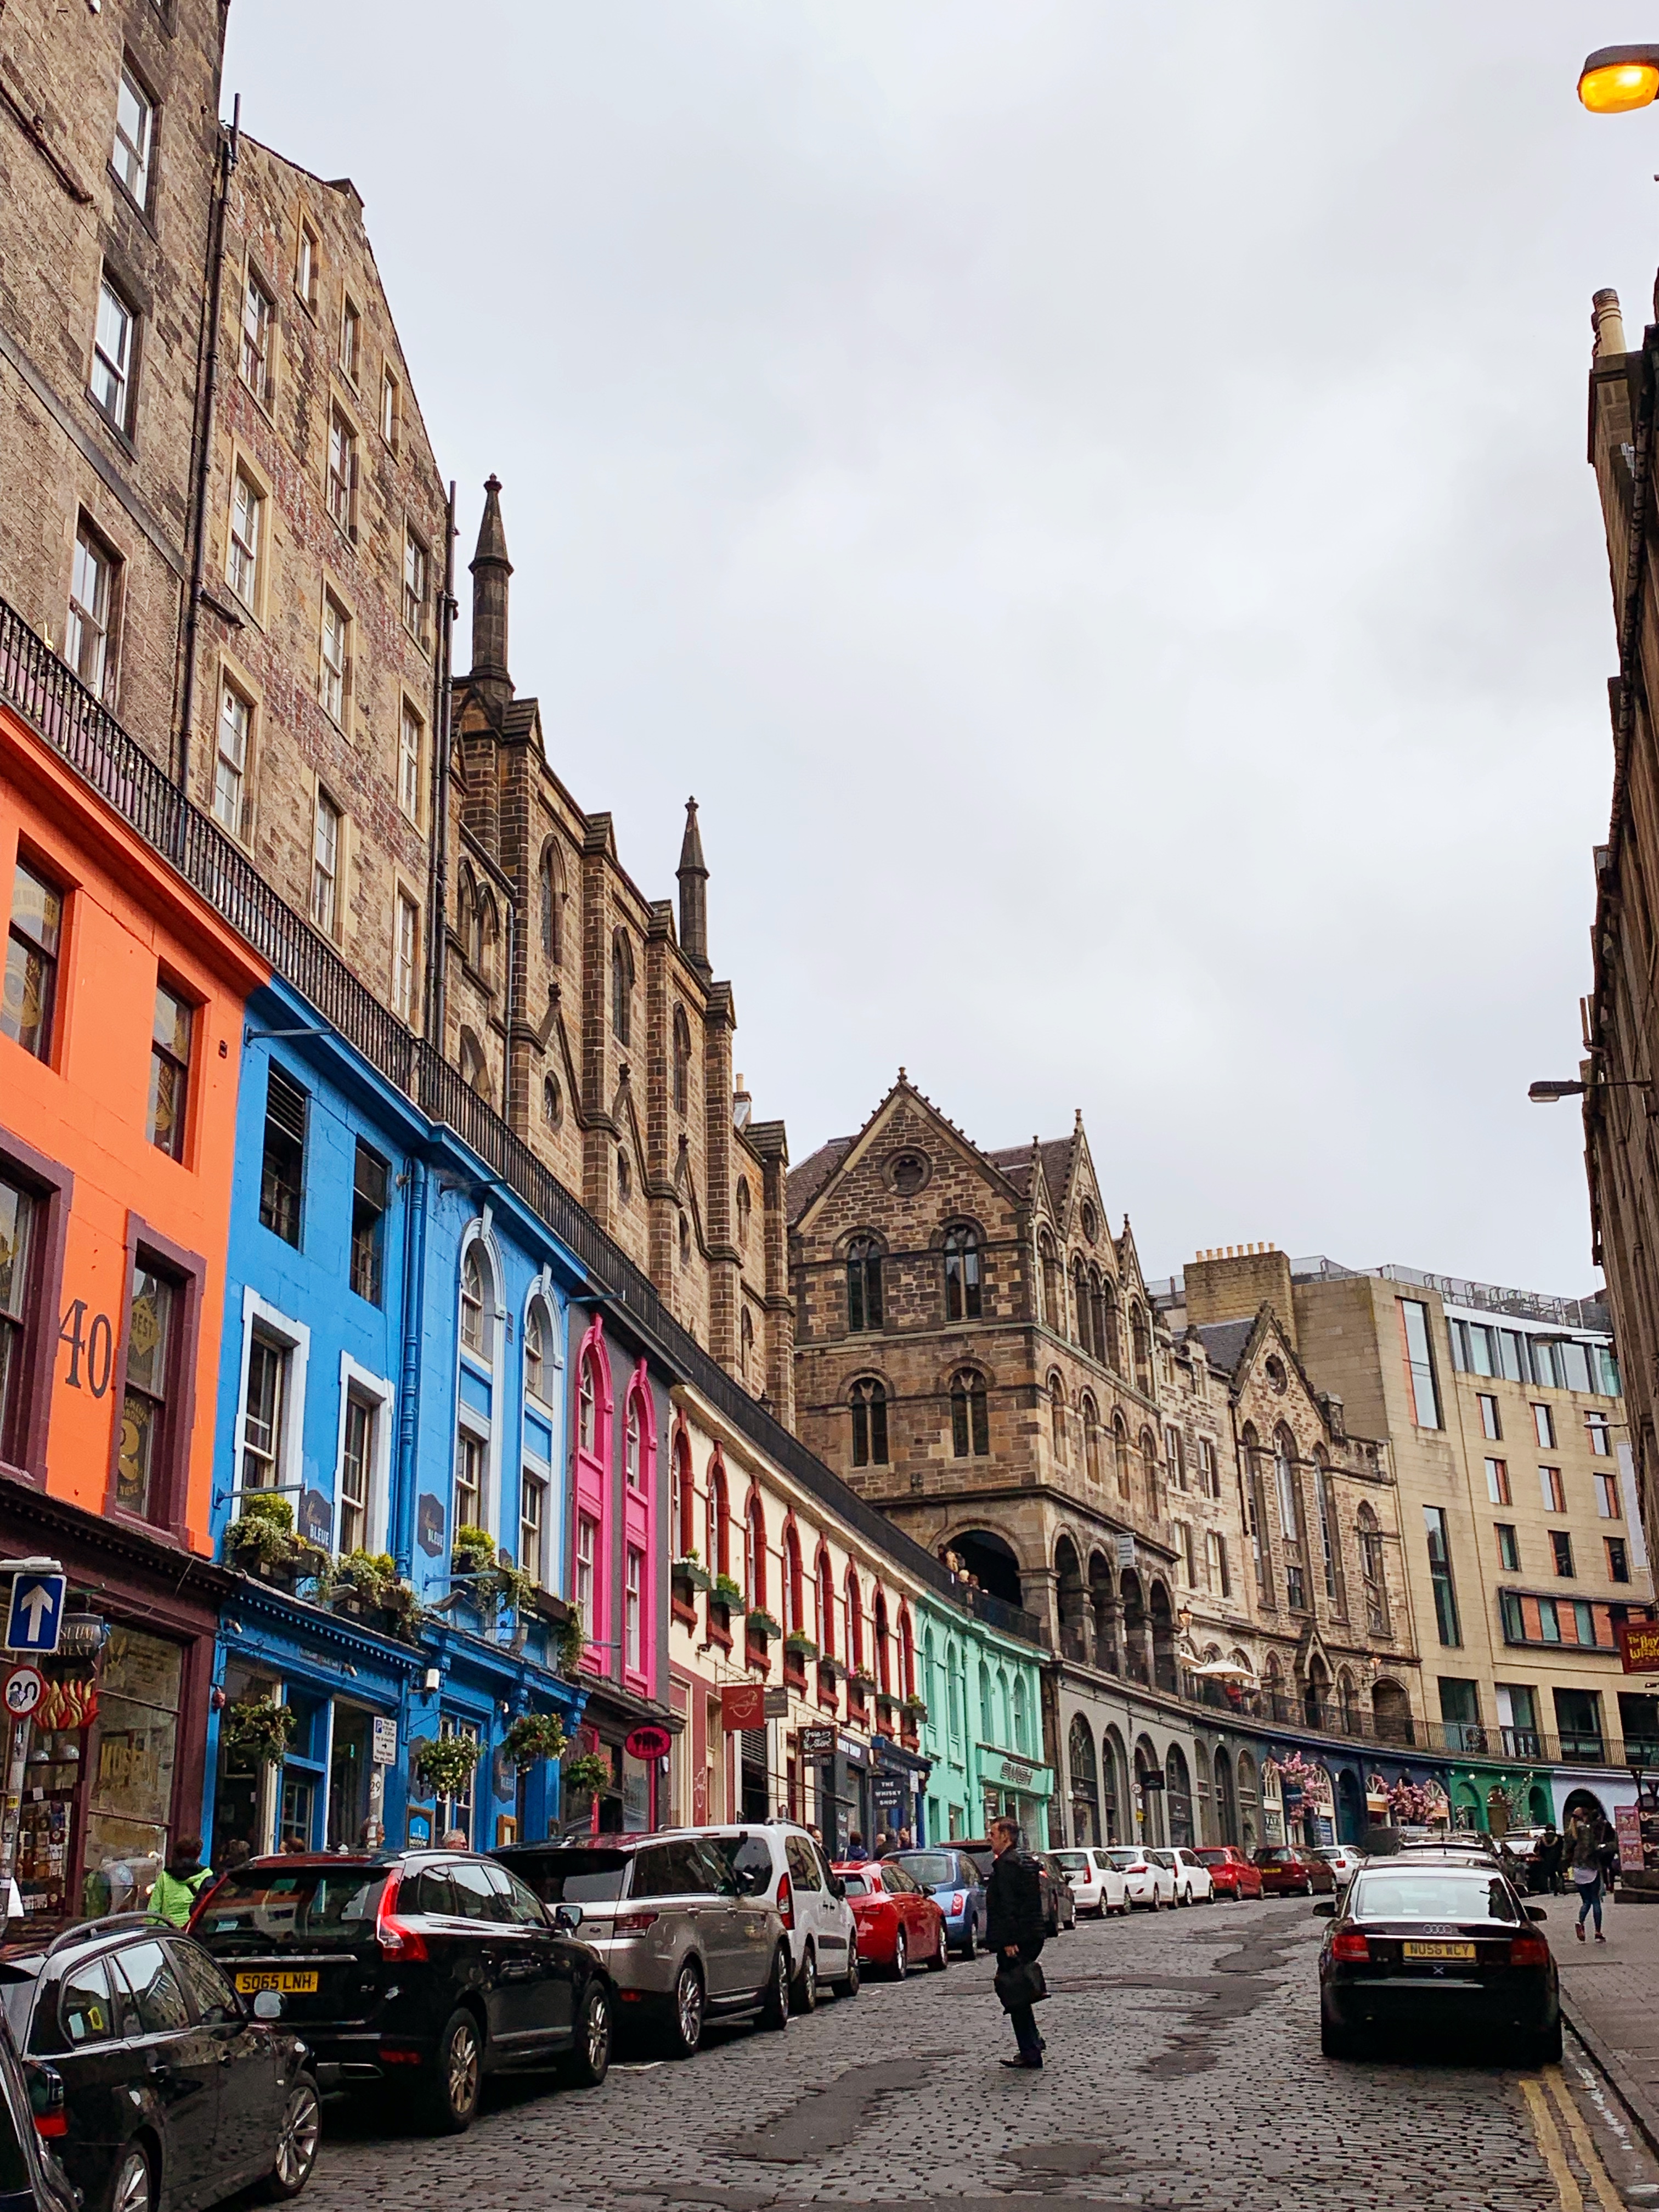 Victoria Street is one of the top things to do in Edinburgh, Scotland